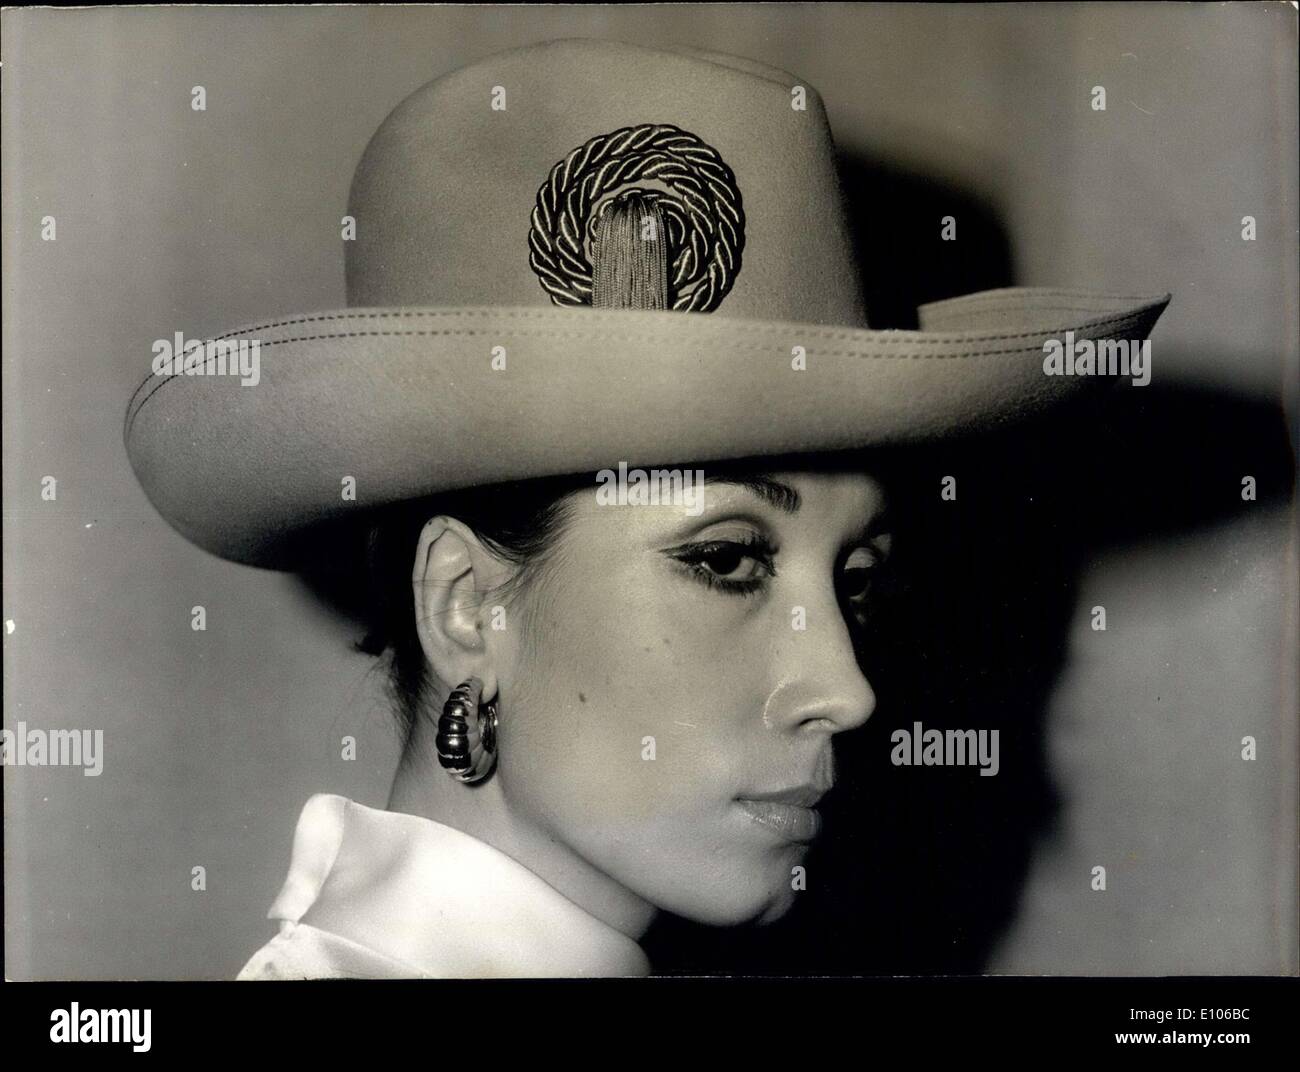 Jan. 21, 1970 - A Sable Old-West Style Hat by Marc Olivier Stock Photo